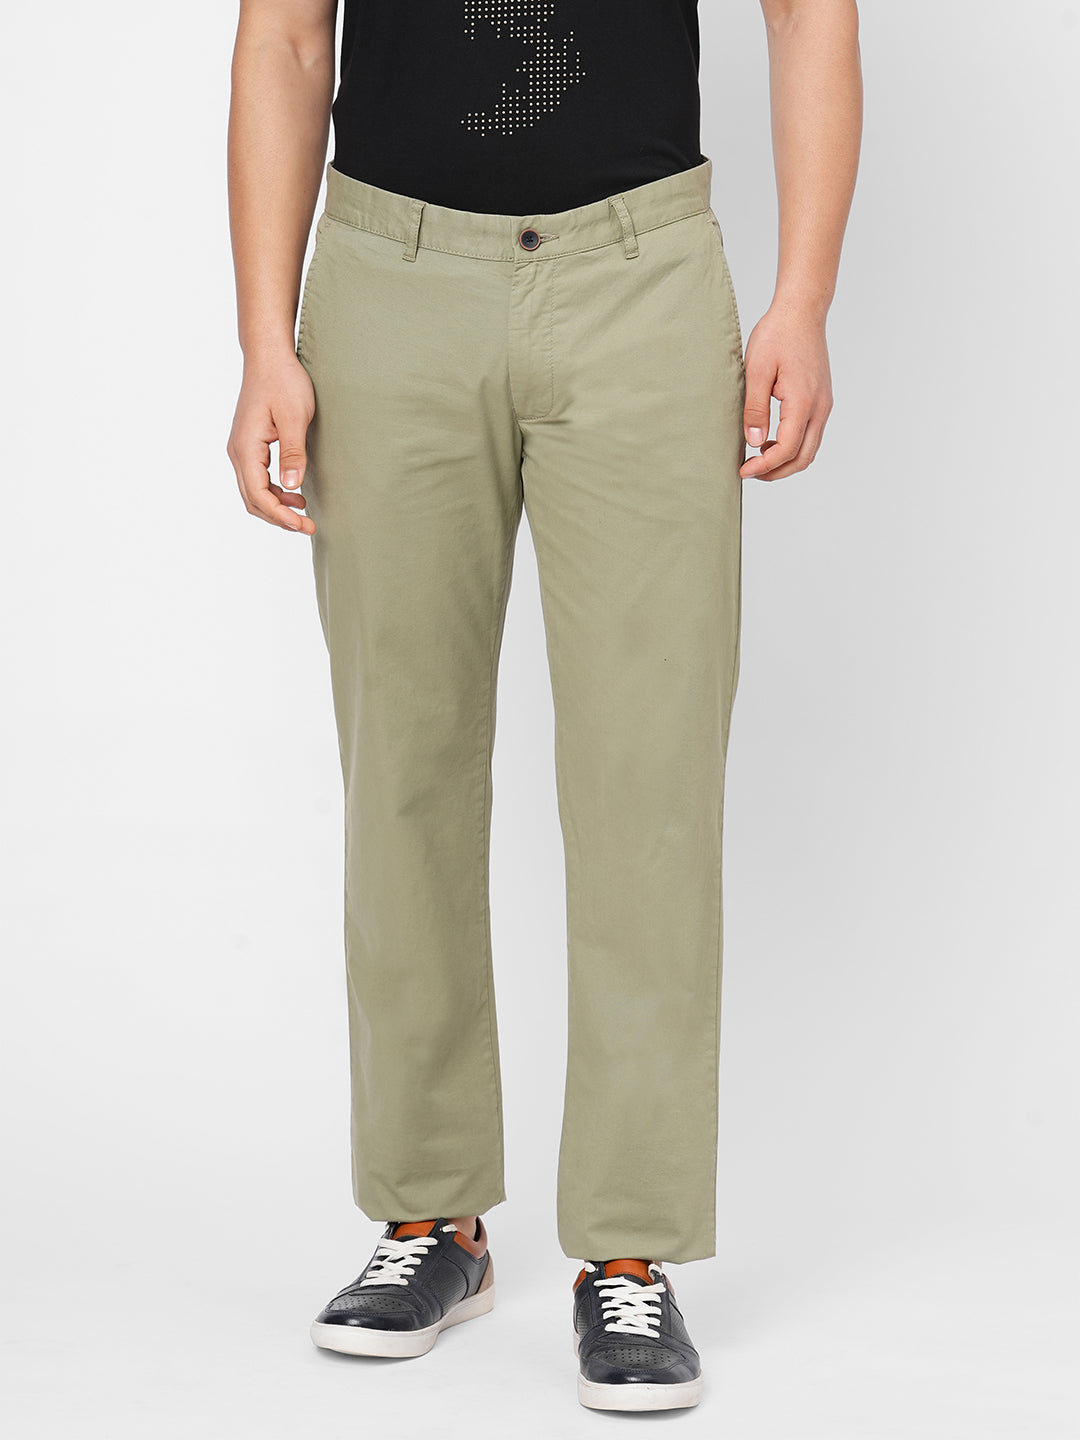 7 Best Chinos for Men: Picked by a Style Expert